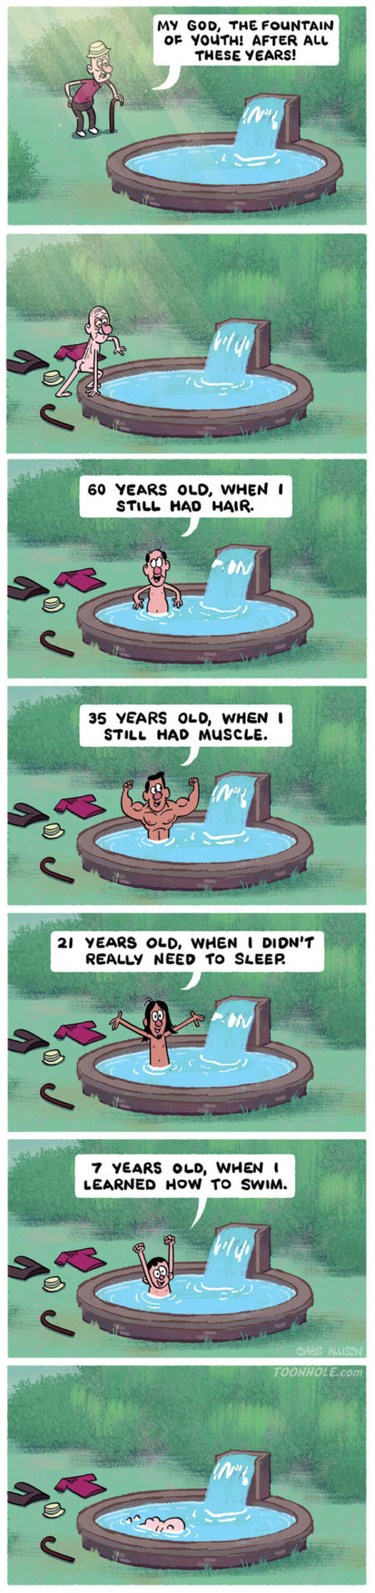 Fountain Of Youth - meme